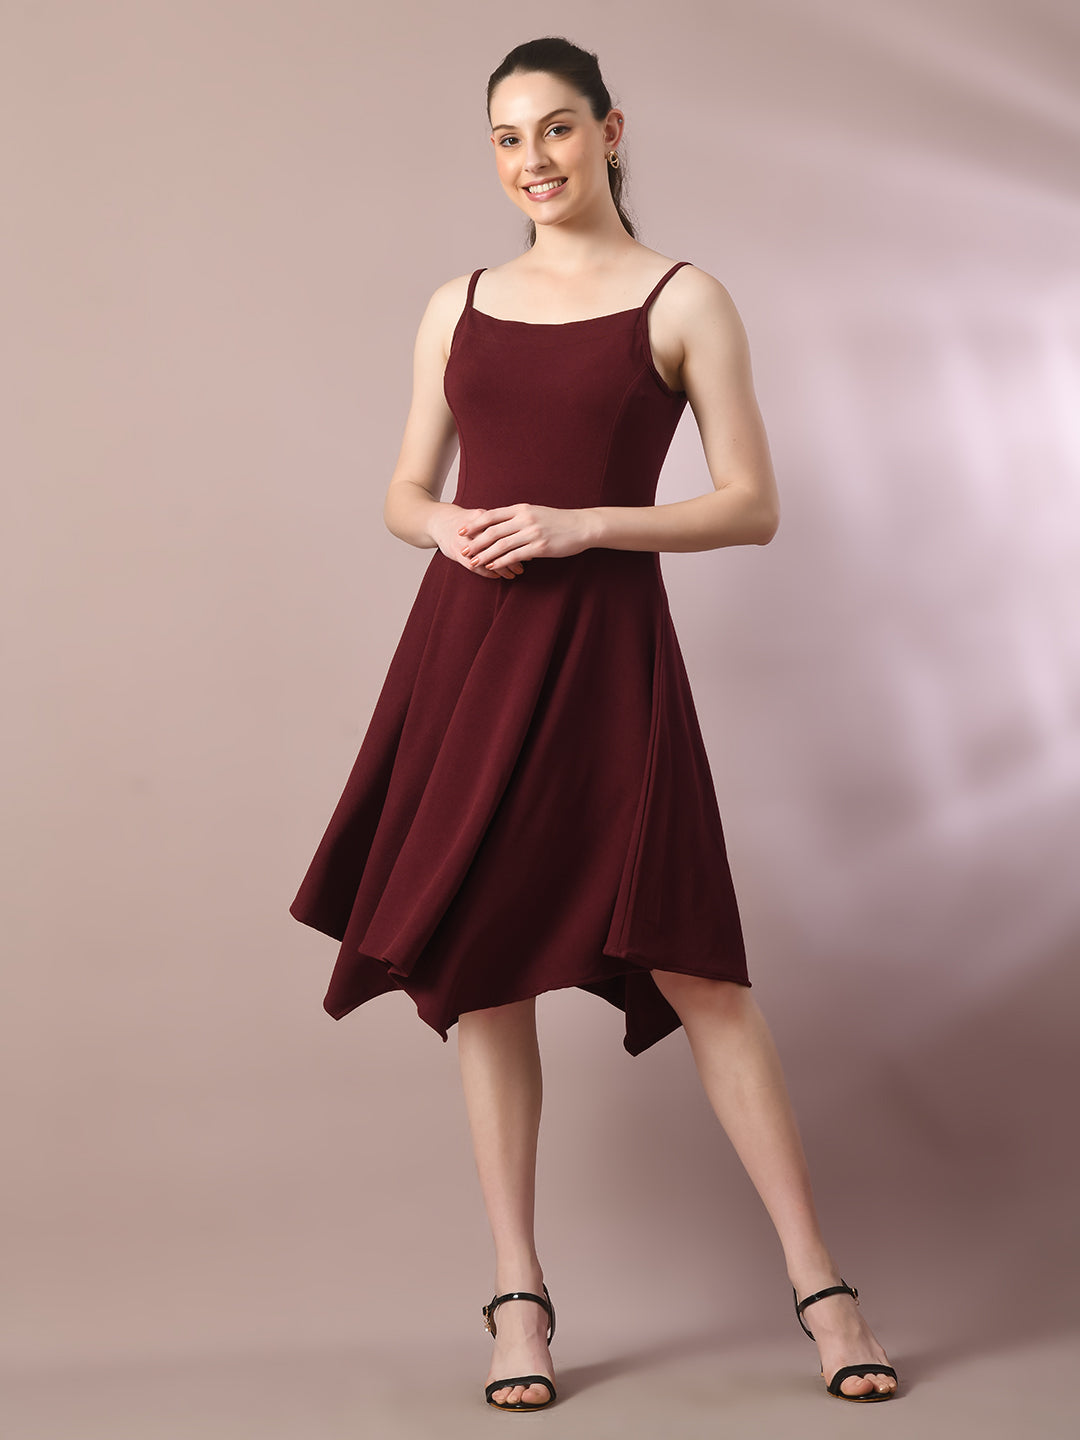 Women's  Maroon Solid Shoulder Straps Fit And Flare Party Dress  - Myshka